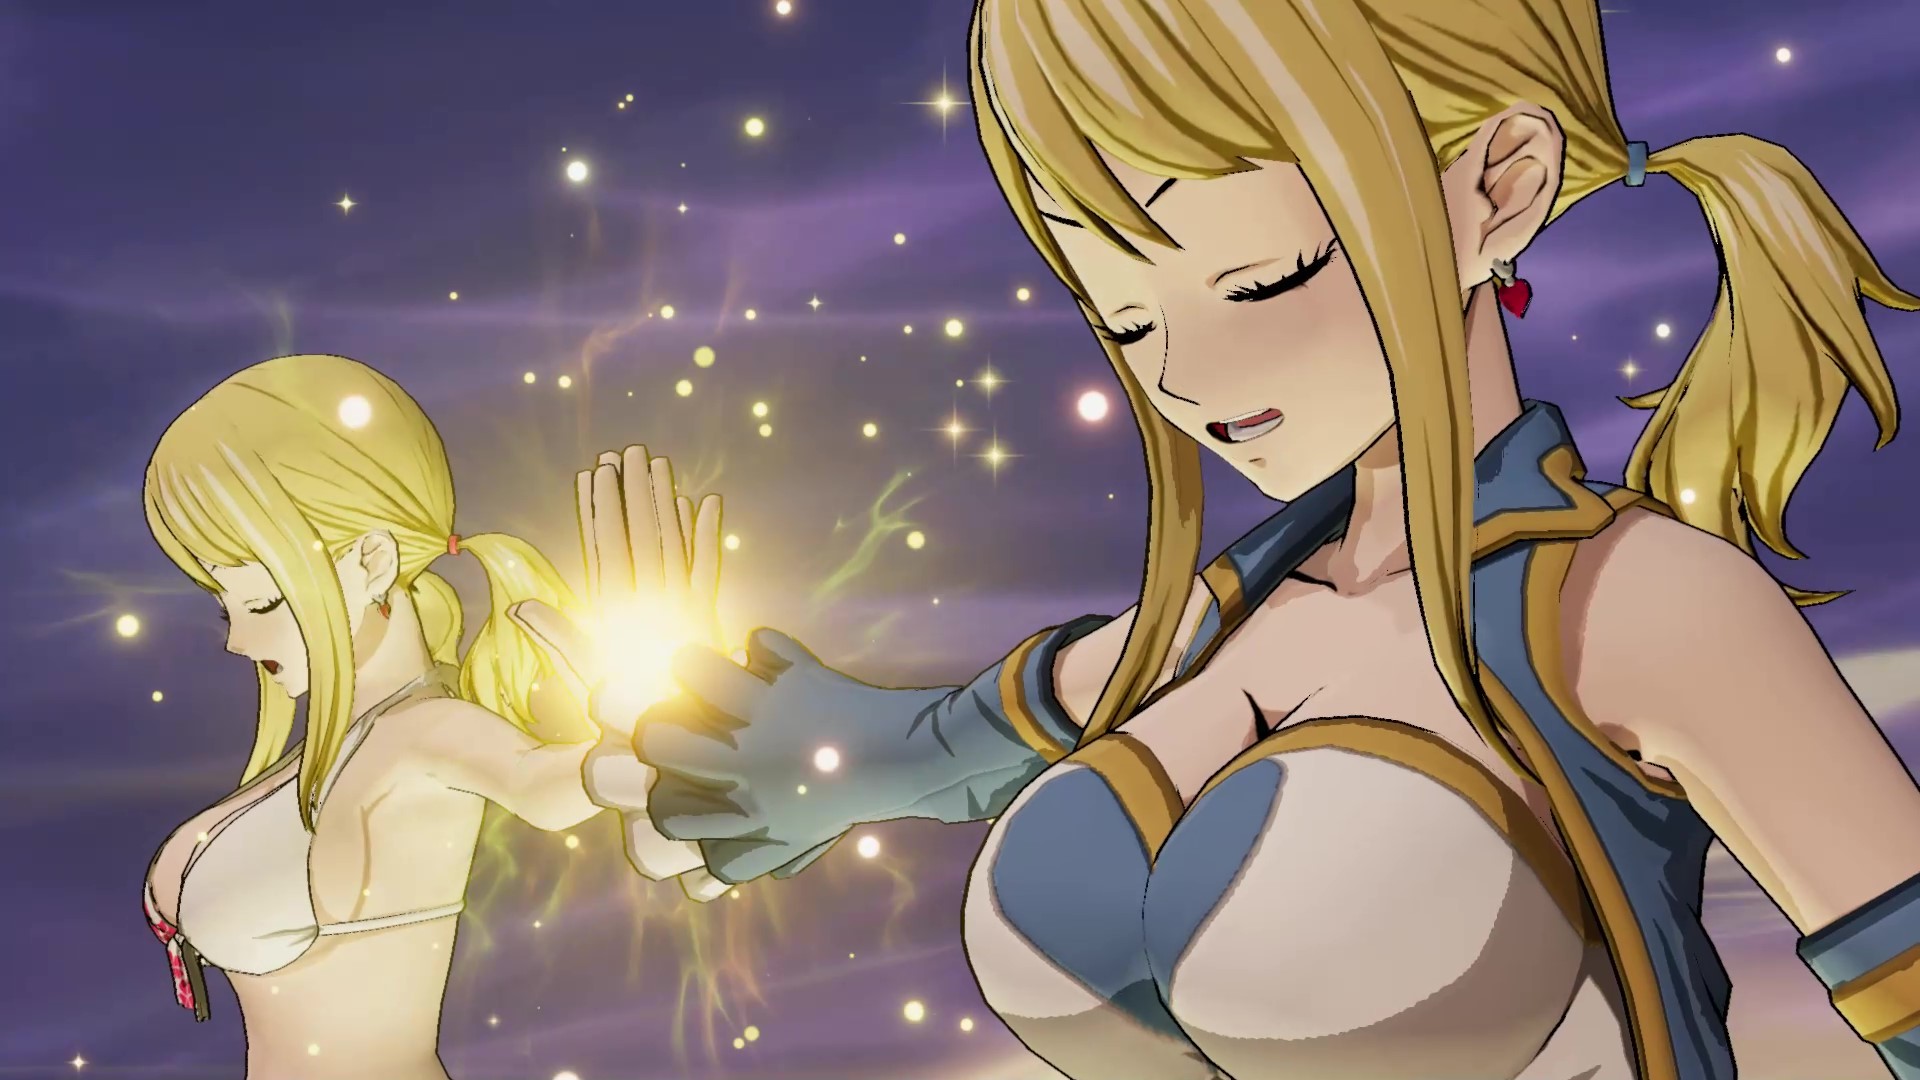 Petition · A Multiplayer Online Role-Playing Game For Fairy Tail ·